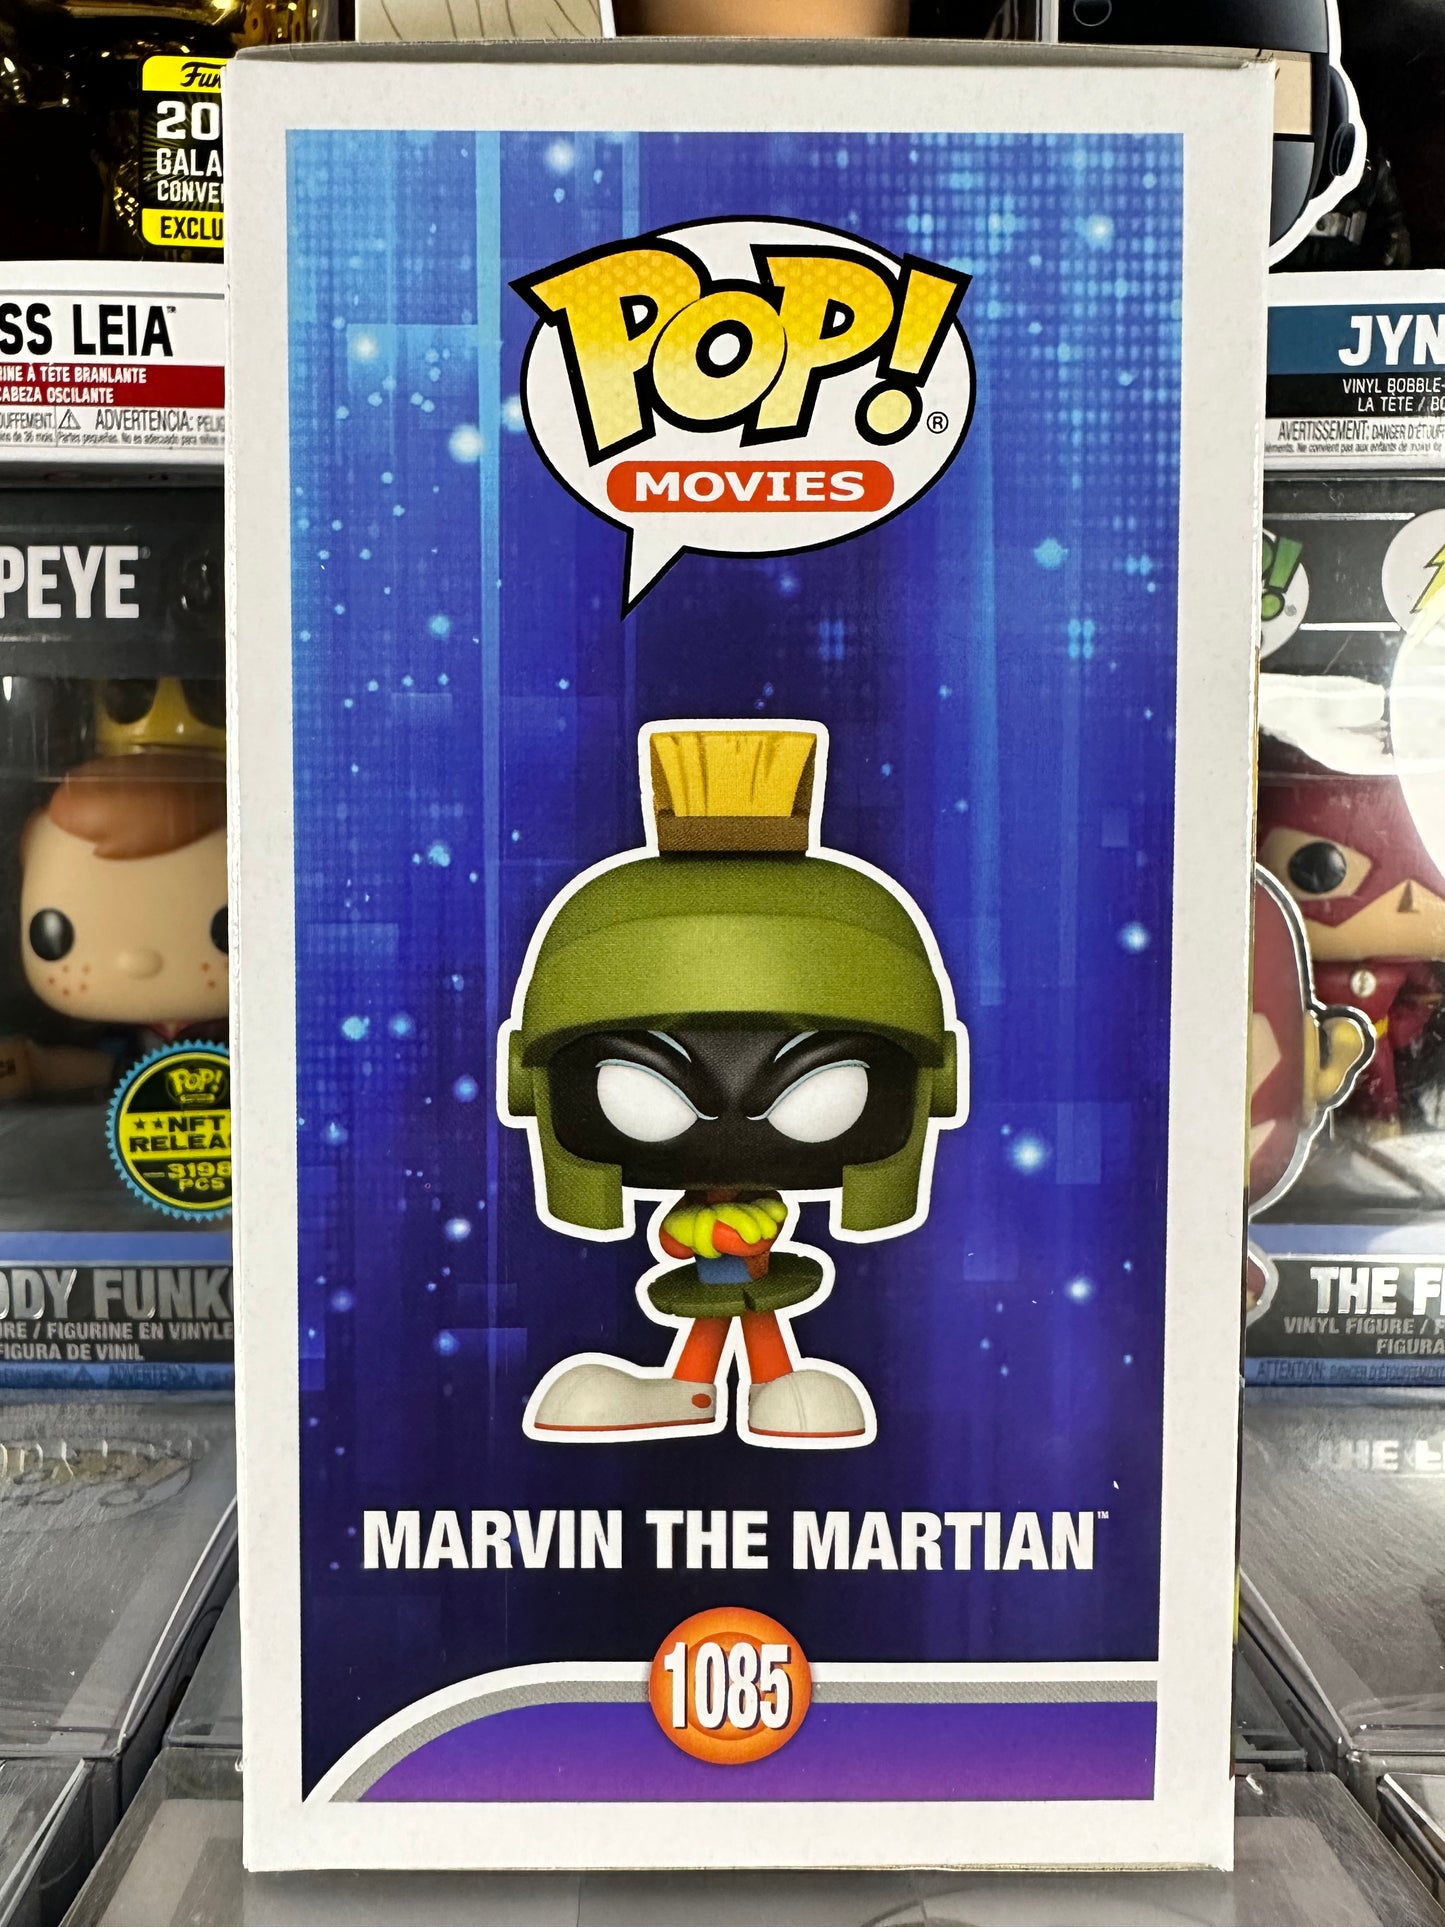 Space Jam A New Legacy - Marvin the Martian (Metallic) (1085) Target Exclusive